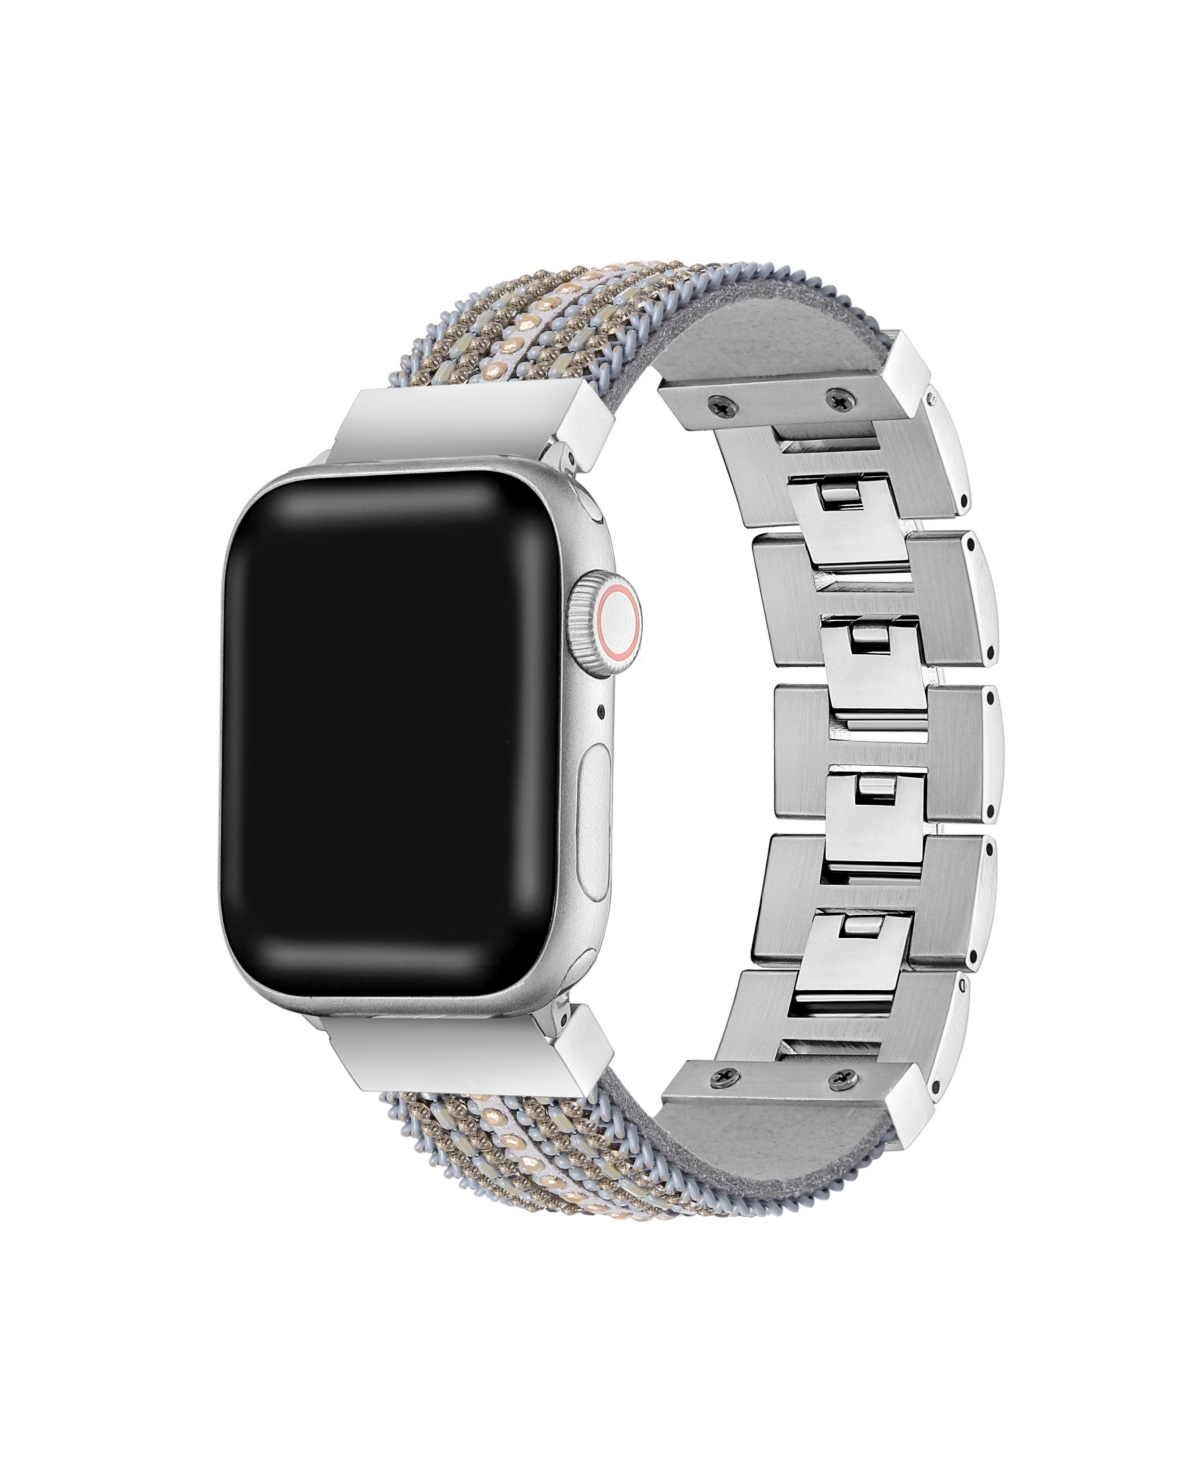 Men's and Women's Black Silver-Tone Jewelry Band for Apple Watch 38mm - Assorted